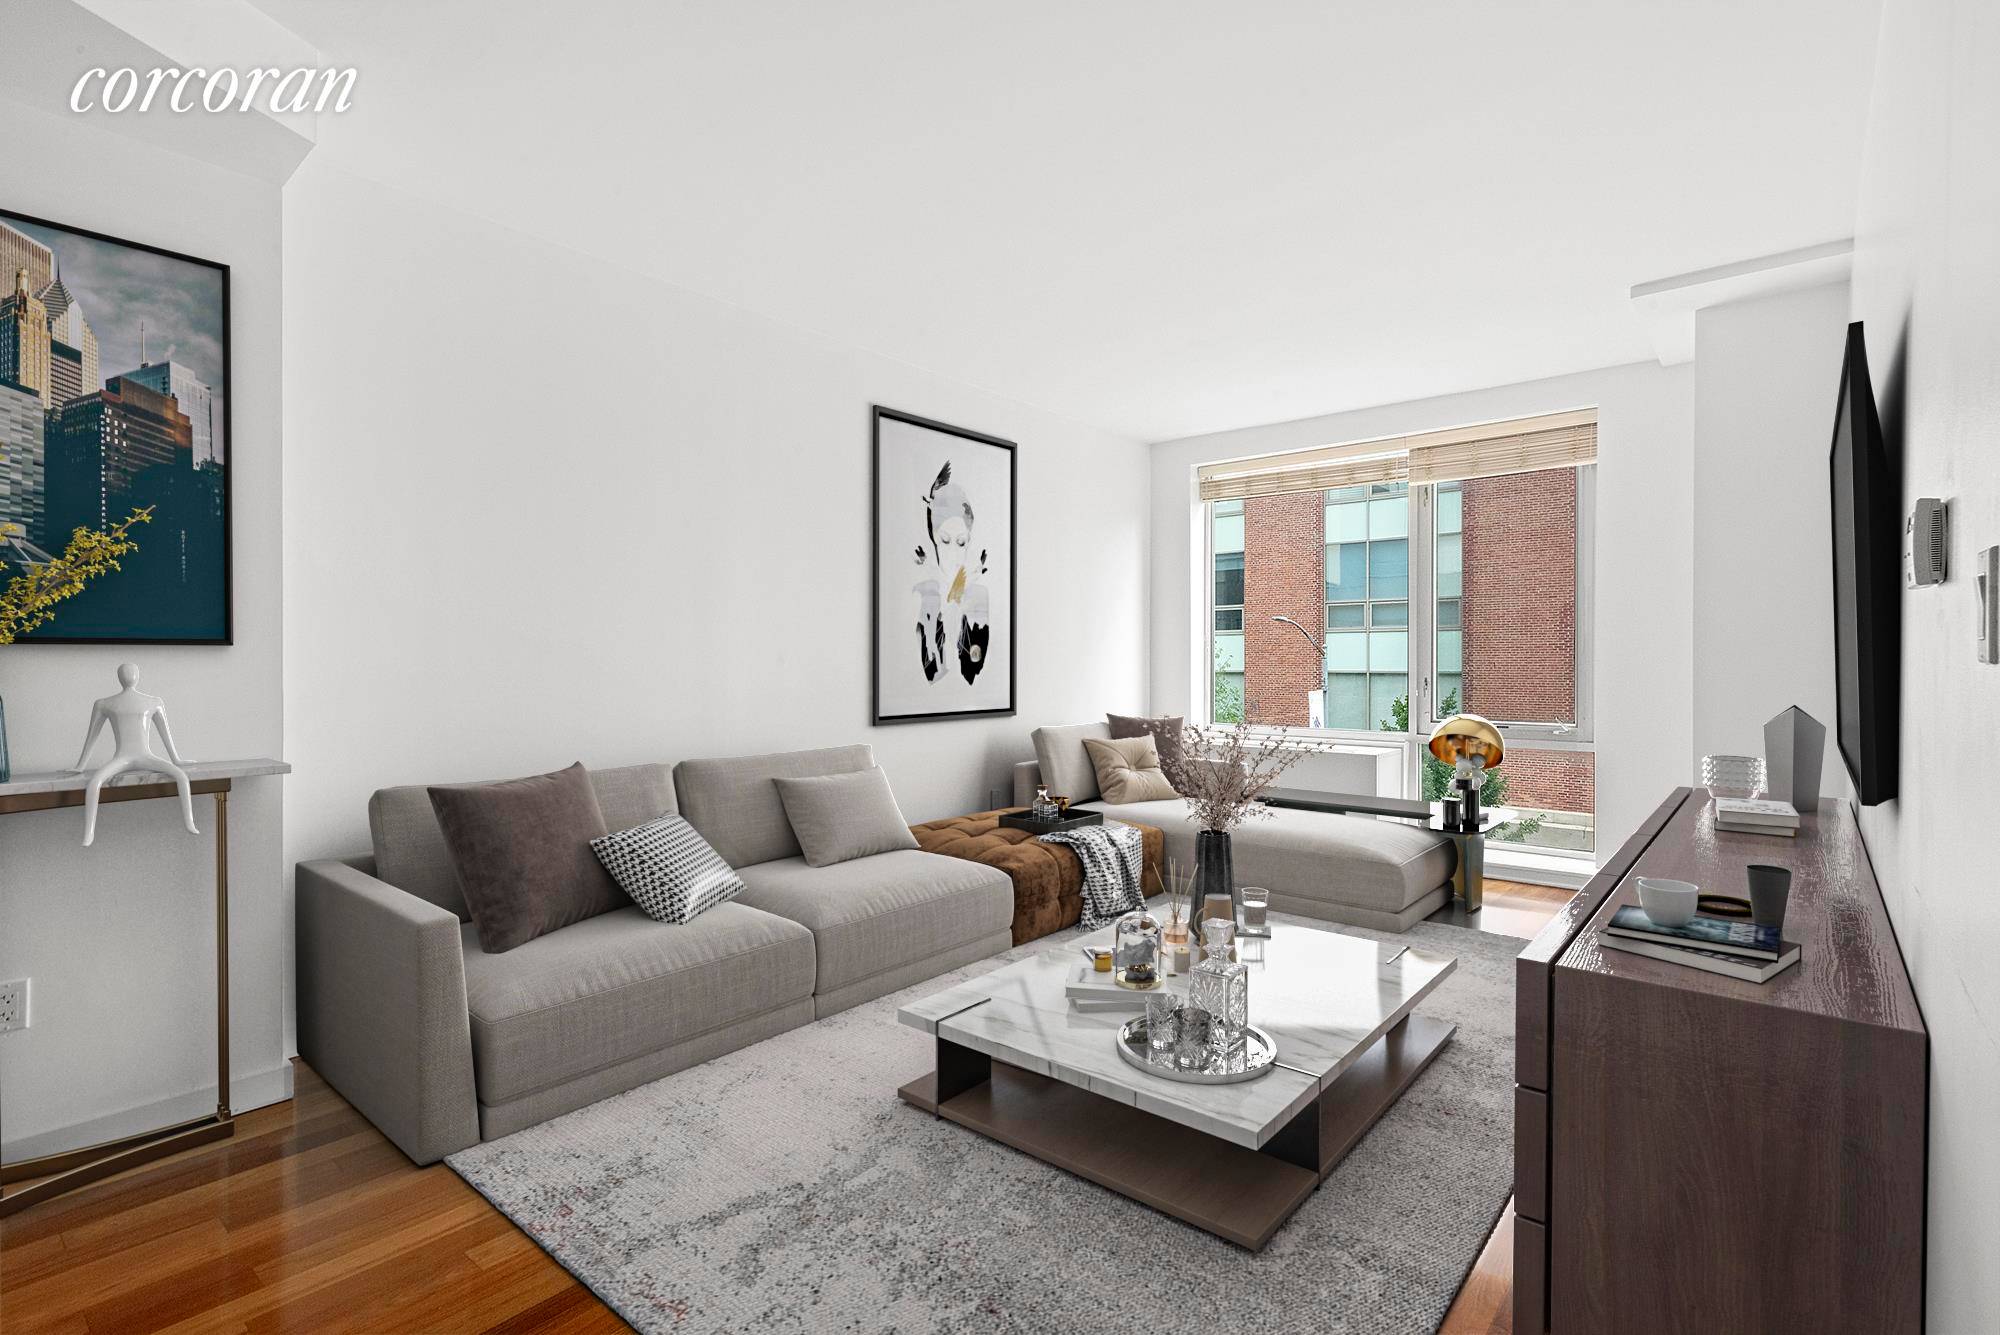 With 740 interior square feet plus a large balcony, offered at 799, 999, 1, 081 per square foot, unit 2L is an excellent value for the Hunters Point waterfront area ...